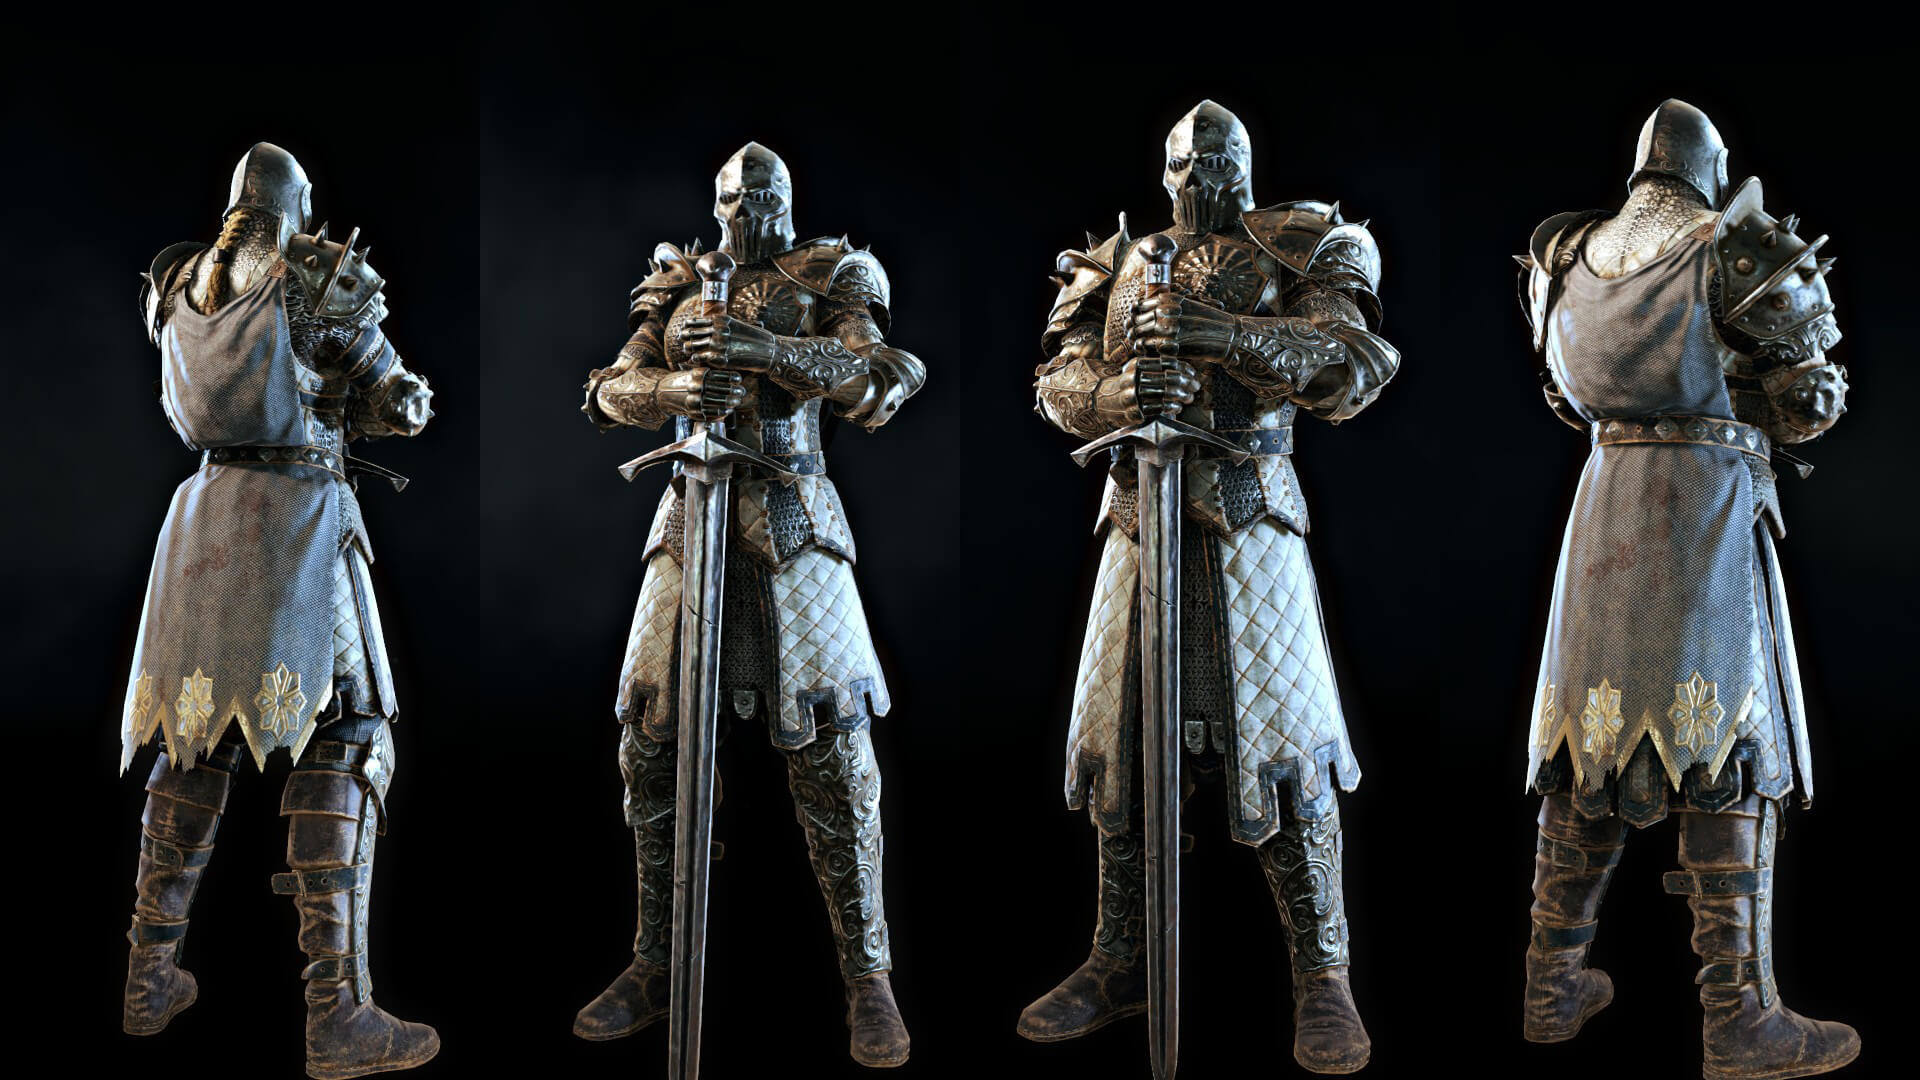 pix For Honor Tiandi Armor Sets welcome for fashion v2.